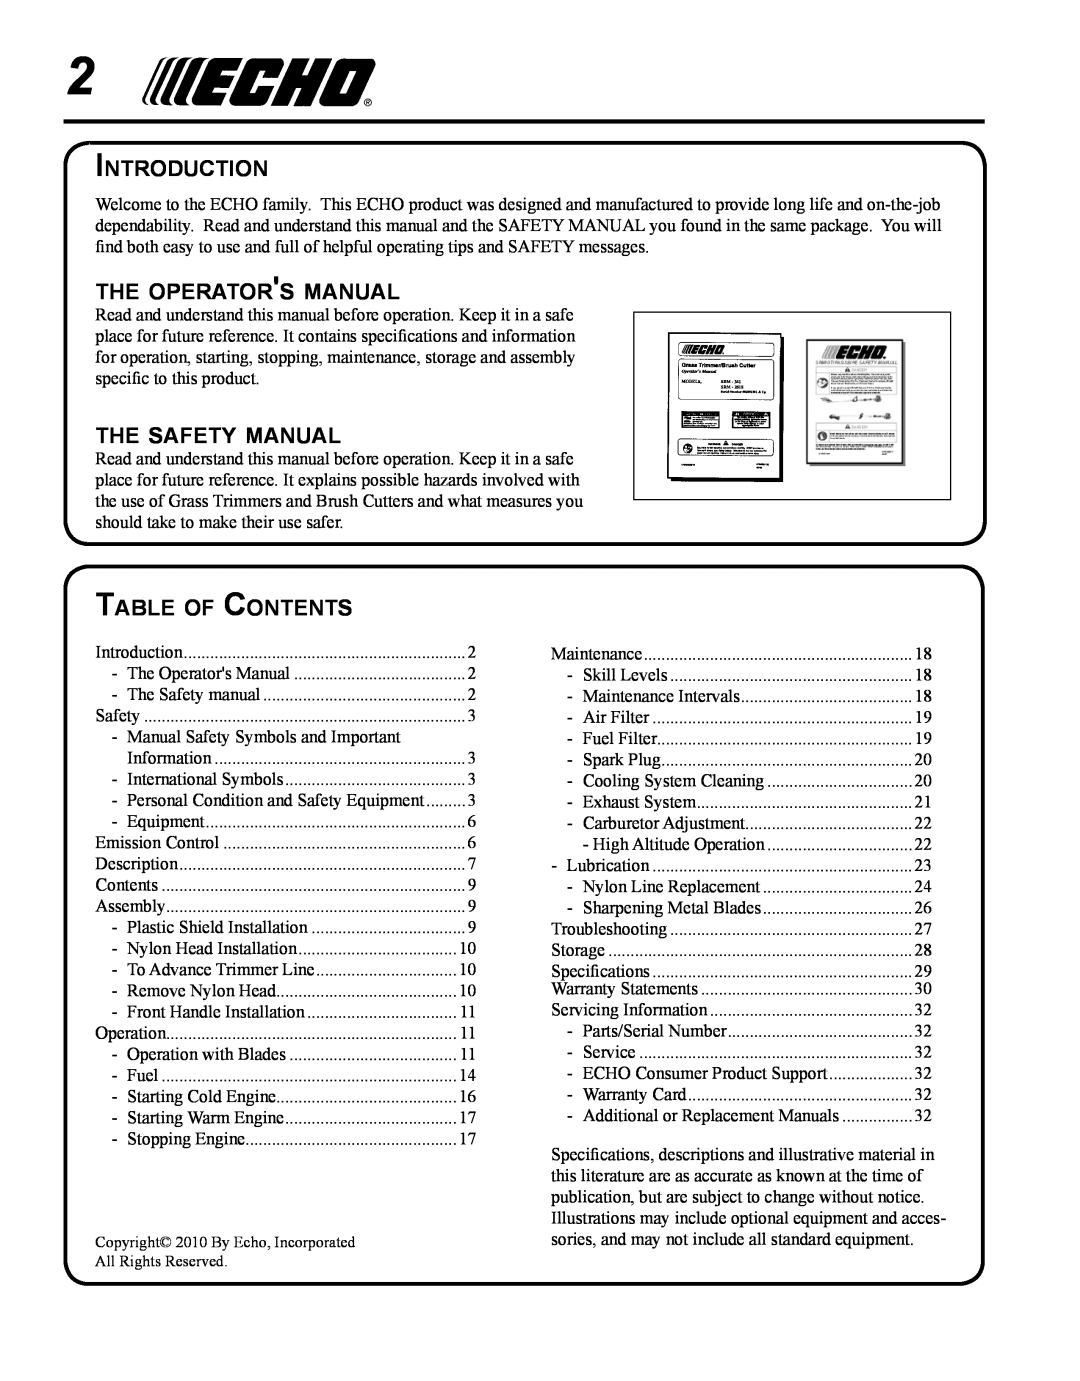 Echo SRM-280S Introduction, the operators manual, the safety manual, Table of Contents 